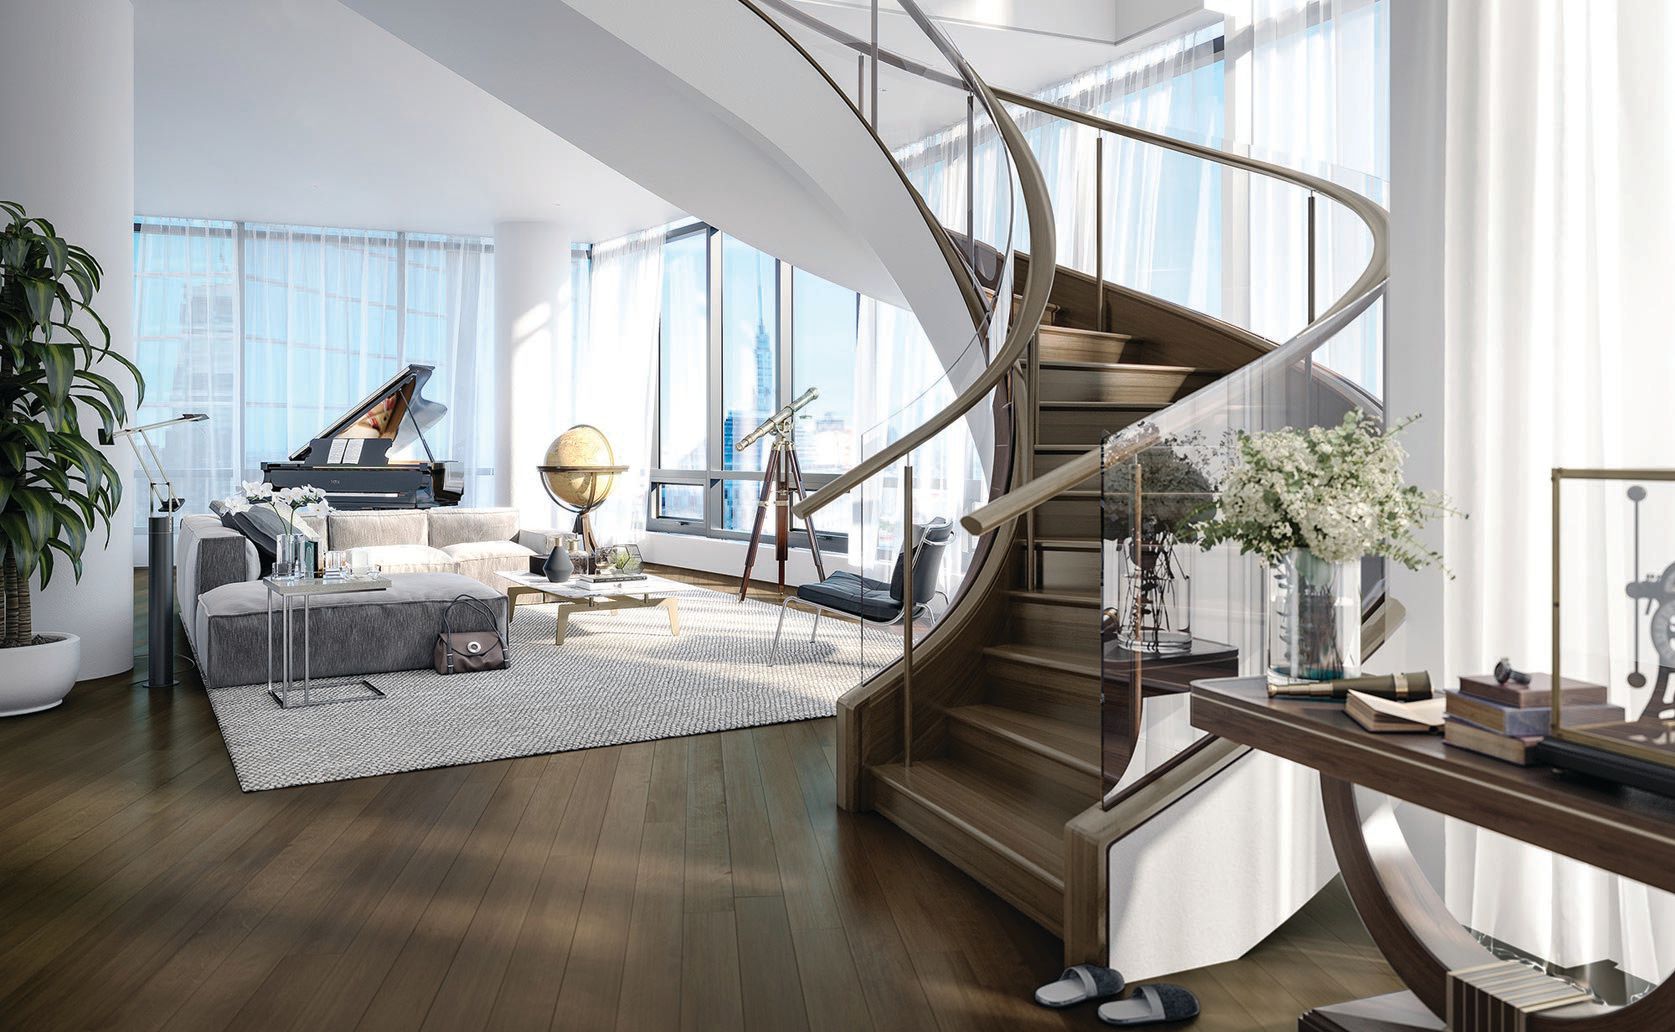 Seven breathtaking penthouses, found on the 34th and 35th floors, feature one of four floor plans PHOTO BY BINYAN STUDIOS